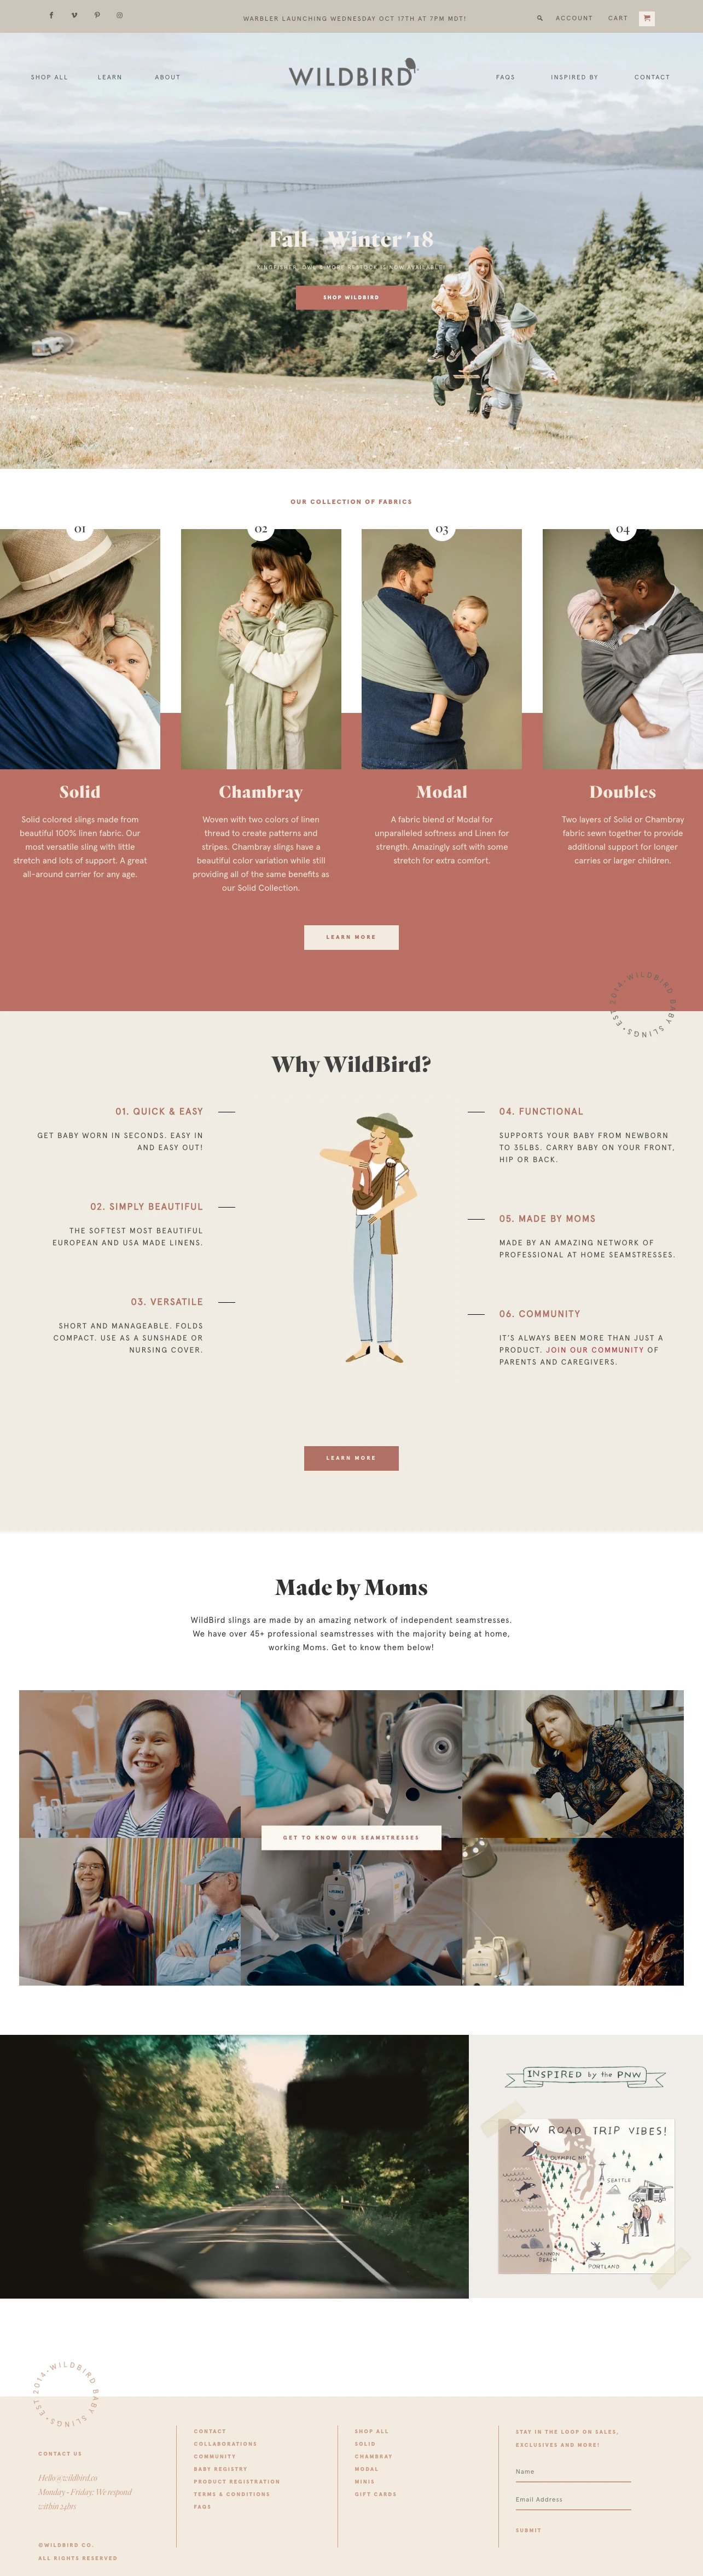 WildBird Landing Page Example: WildBird is a quick, easy and beautiful Baby Carrier. Our Ring Slings are made for Newborns to Toddlers.